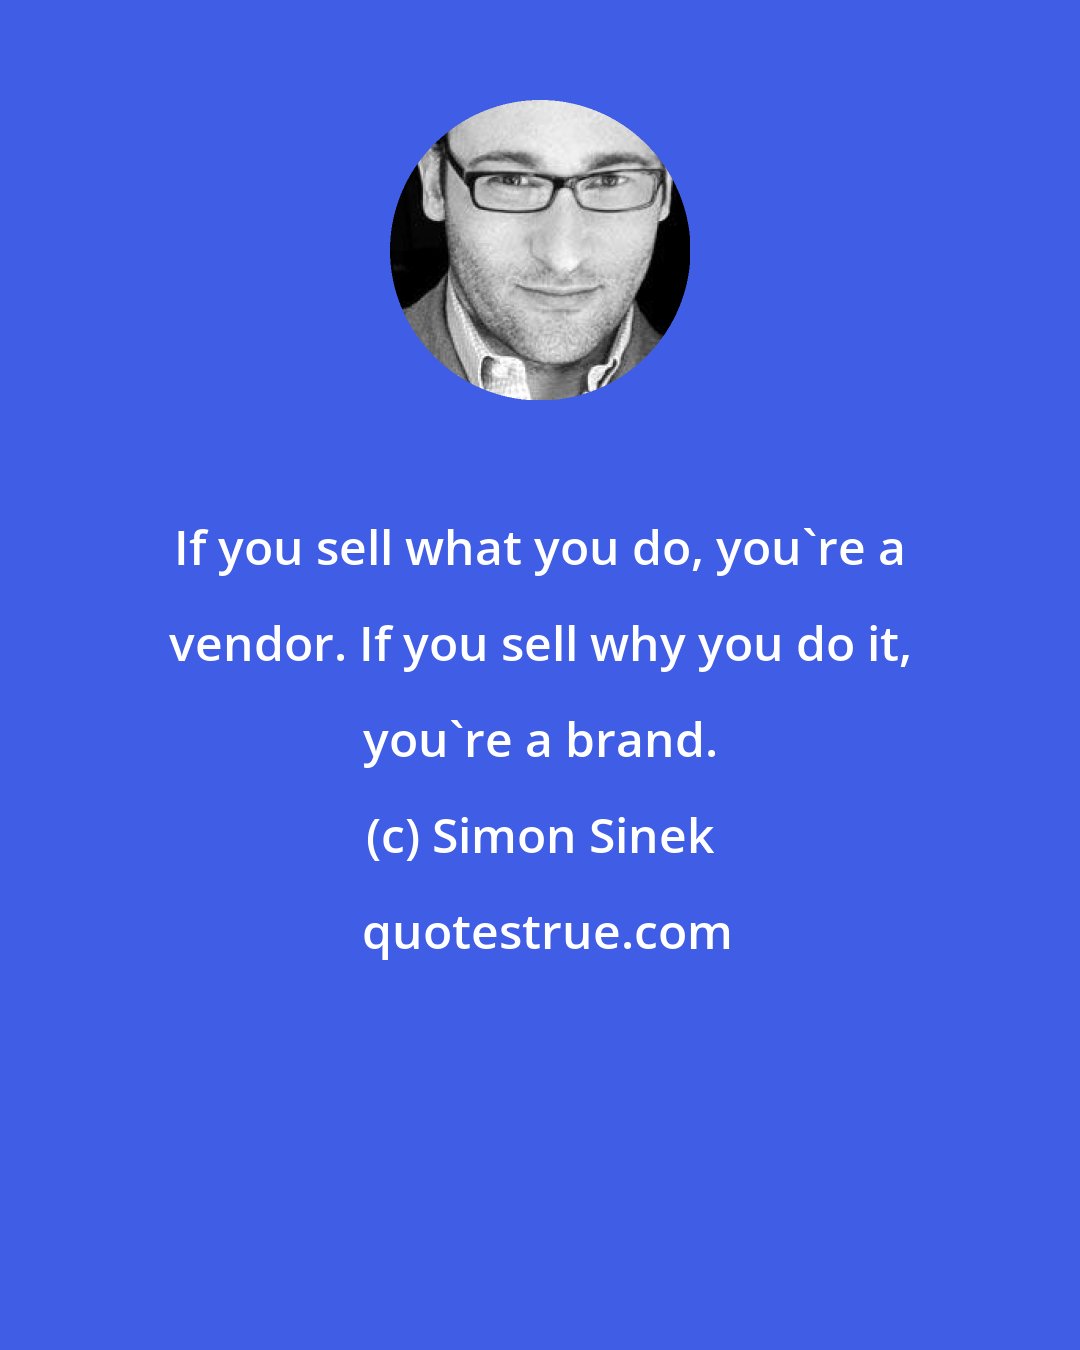 Simon Sinek: If you sell what you do, you're a vendor. If you sell why you do it, you're a brand.